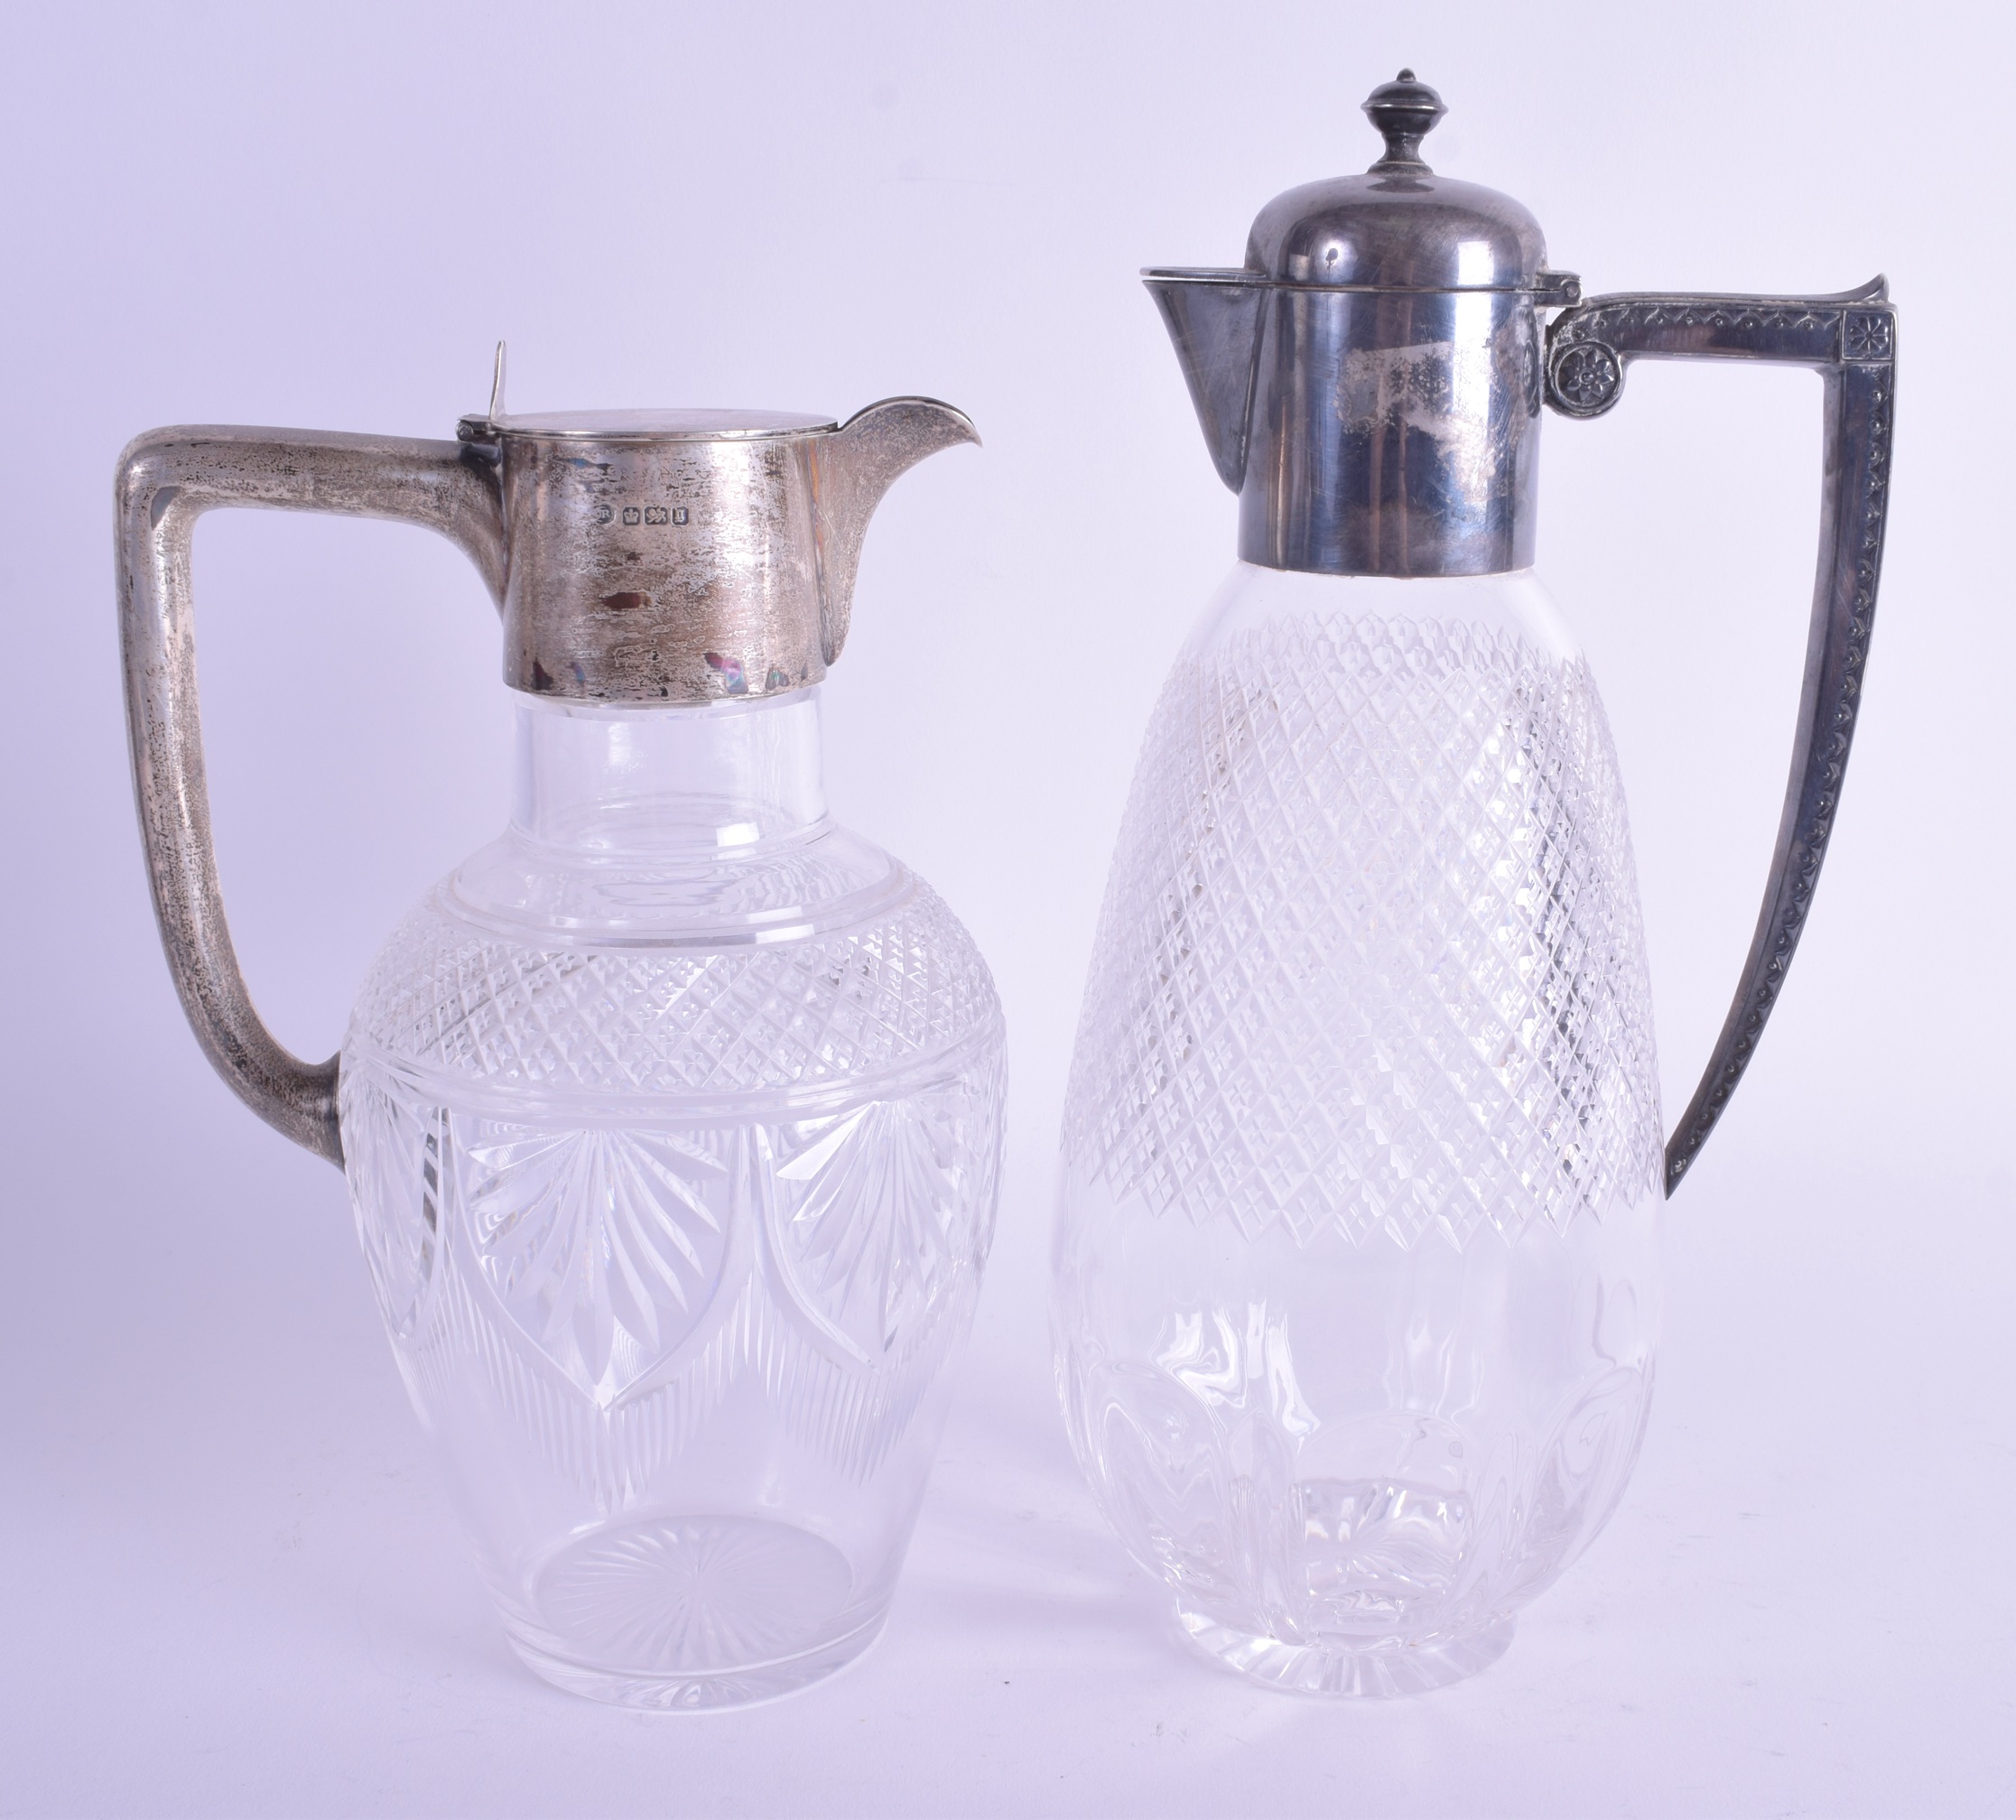 TWO ANTIQUE SILVER AND CUT GLASS CLARET JUGS. 27 cm & 22 cm high. (2)